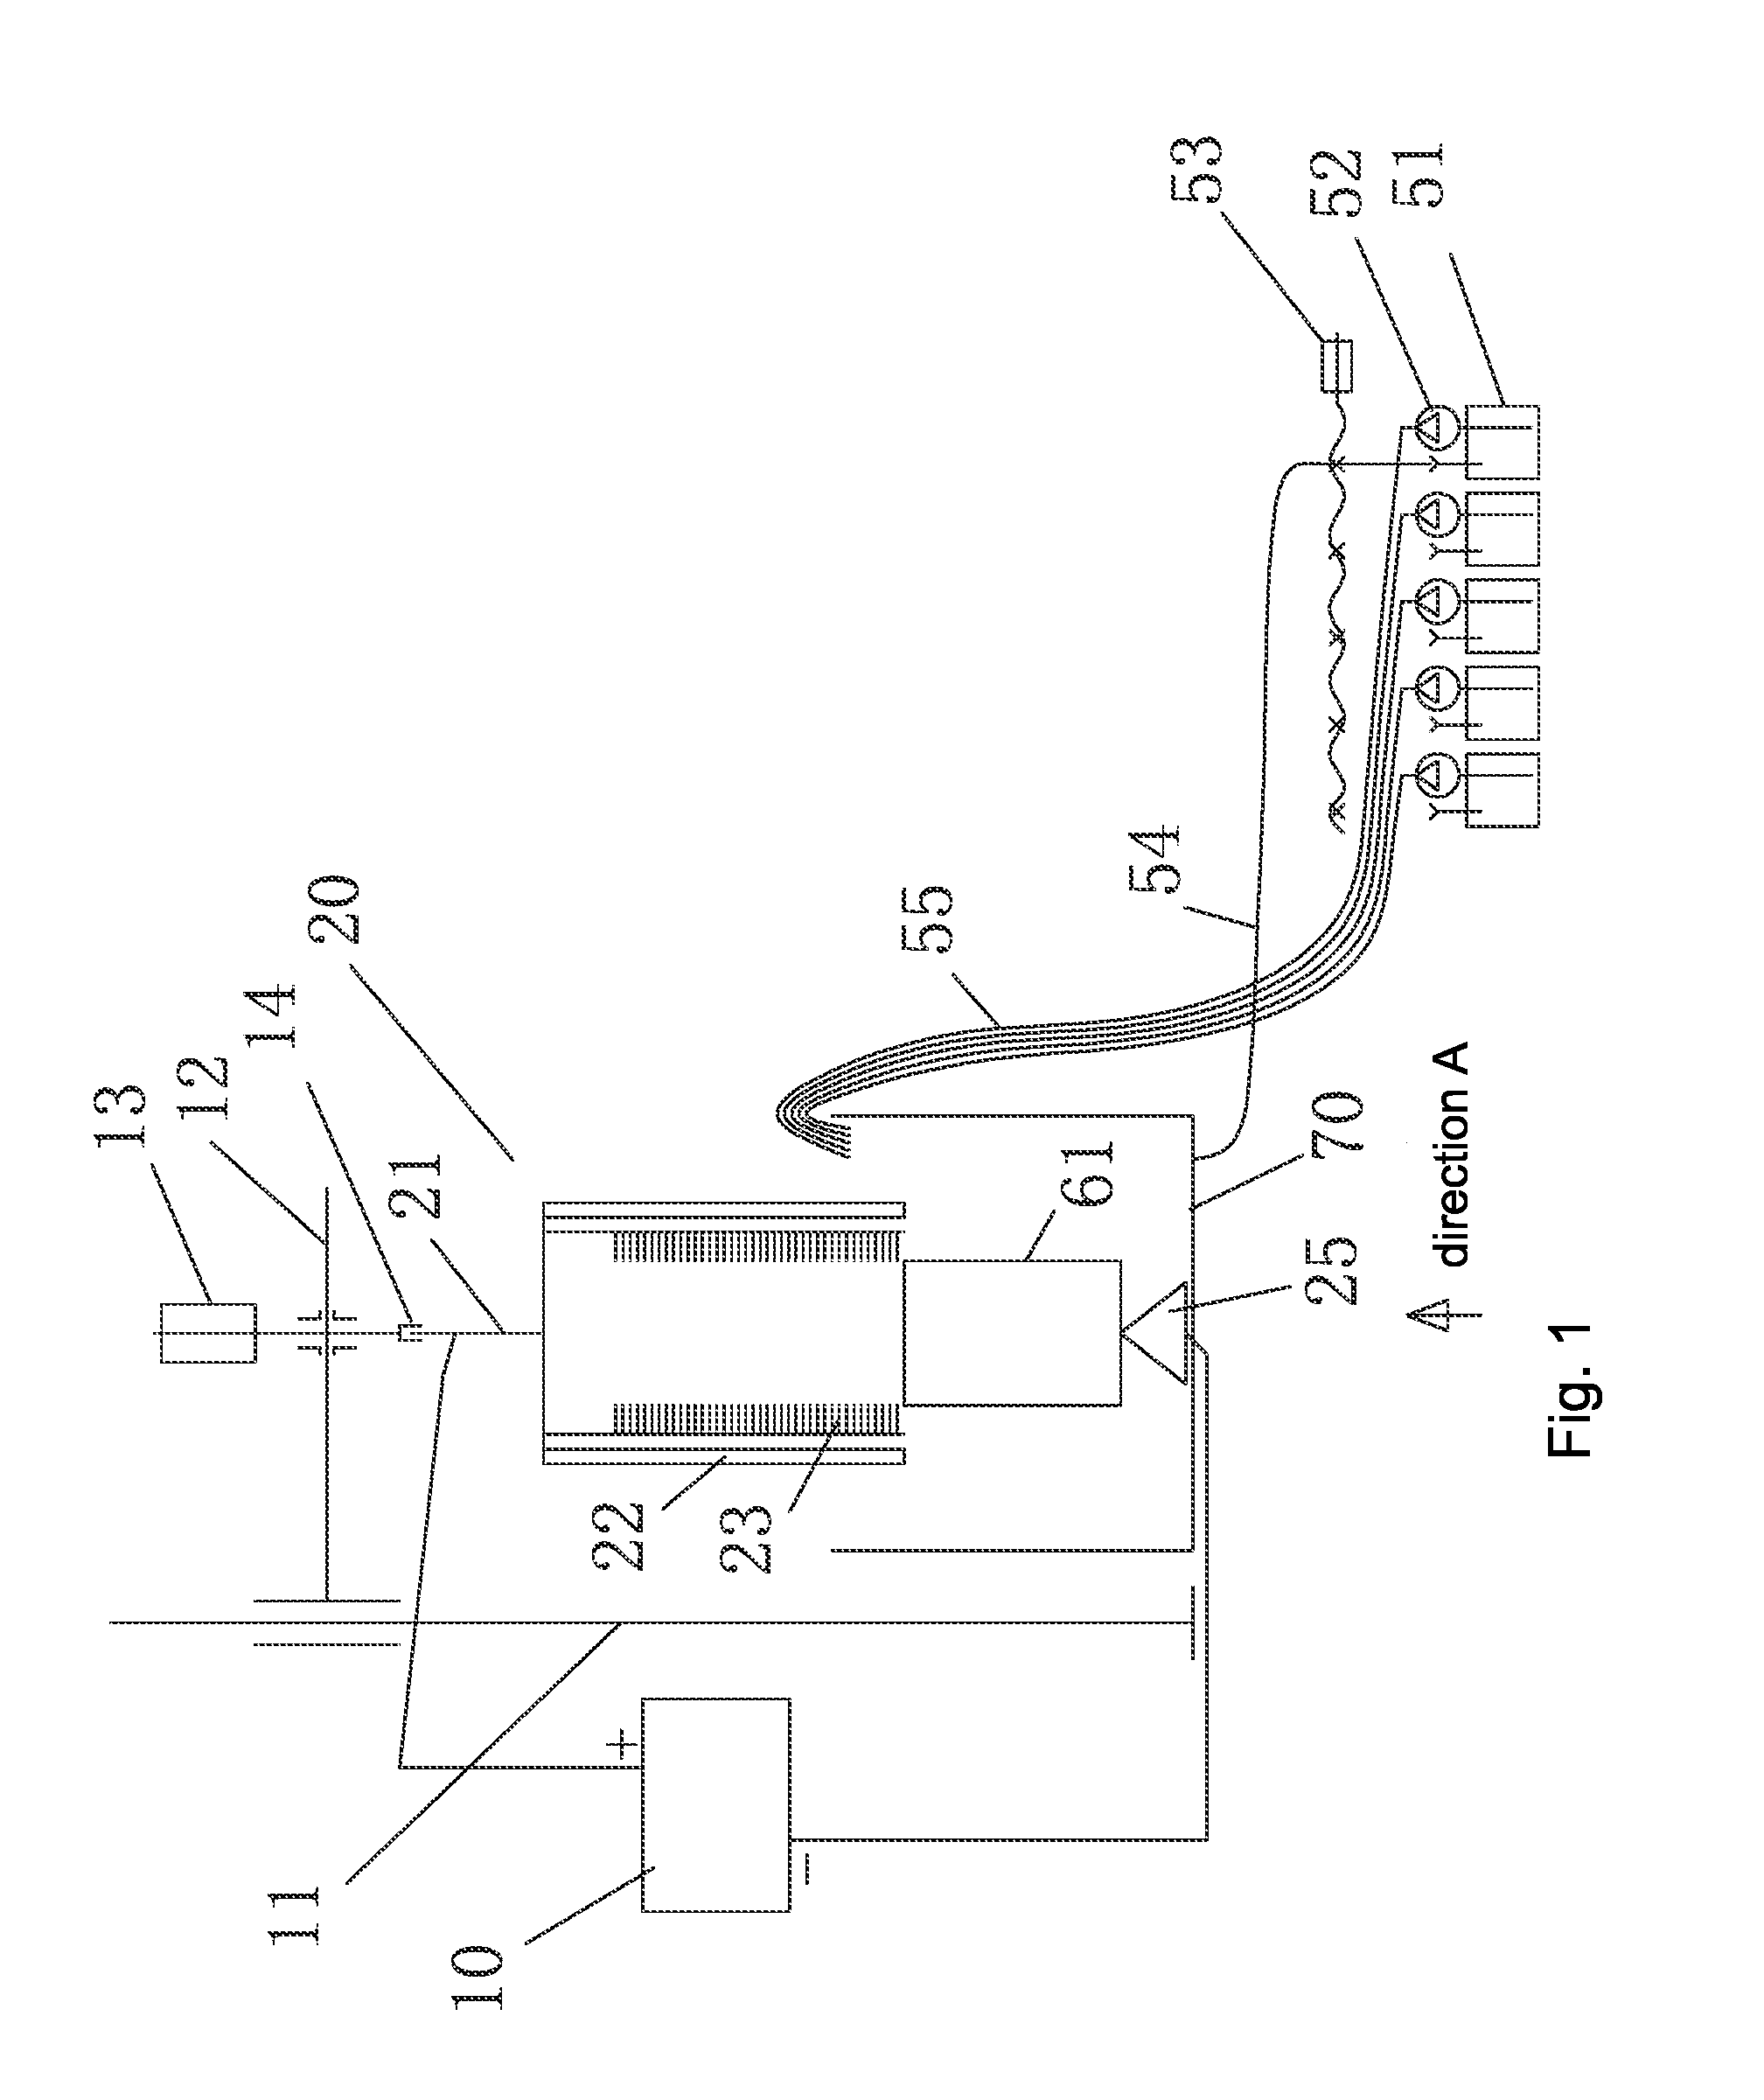 Electrical brush plating system and method for metal parts